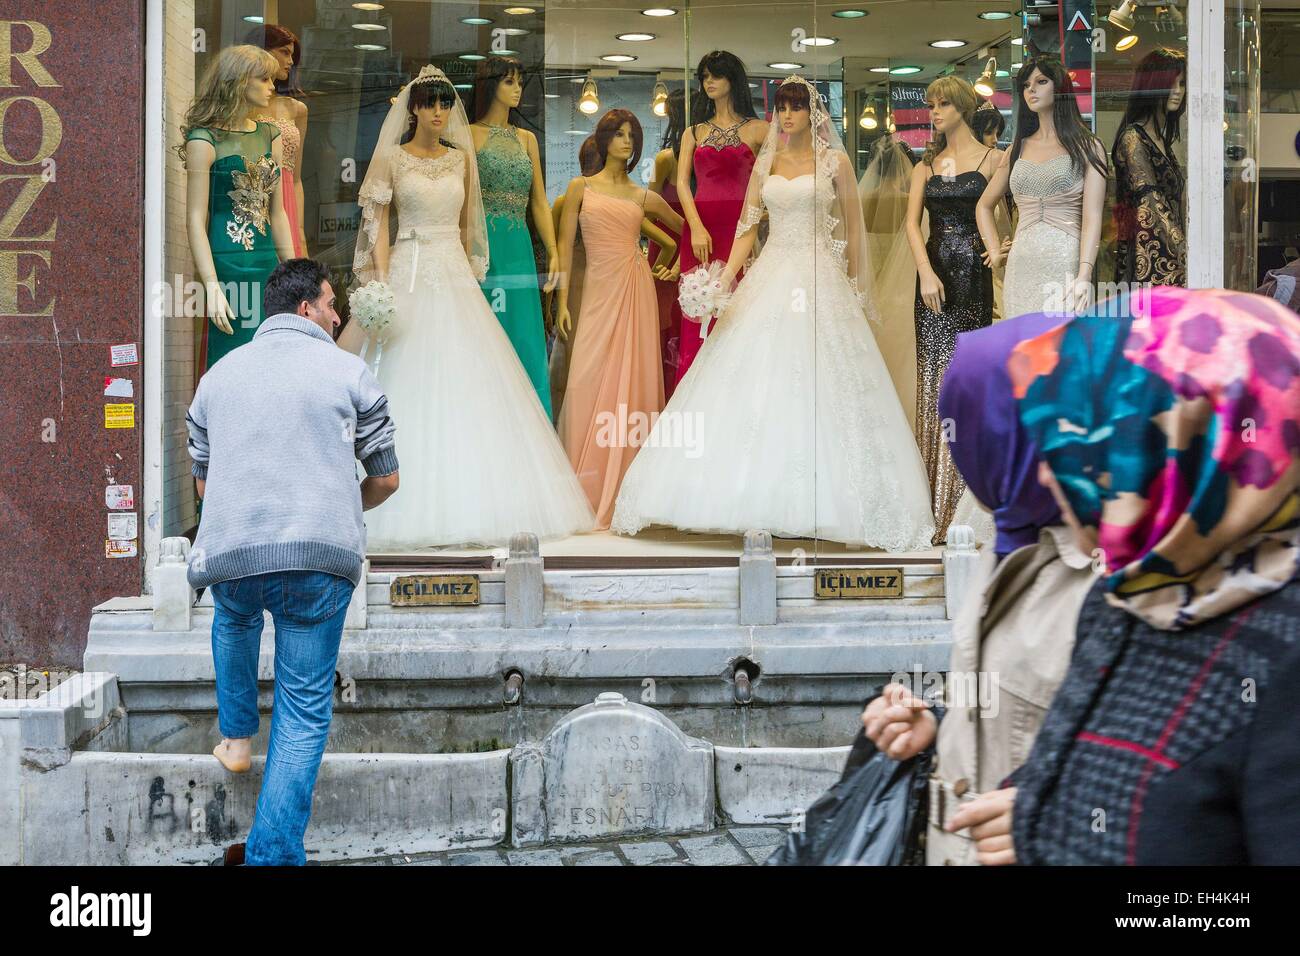 Turkey, Istanbul, Mercan, Turkish man washing his feet in a fountain in front of the window of a wedding dress store Stock Photo